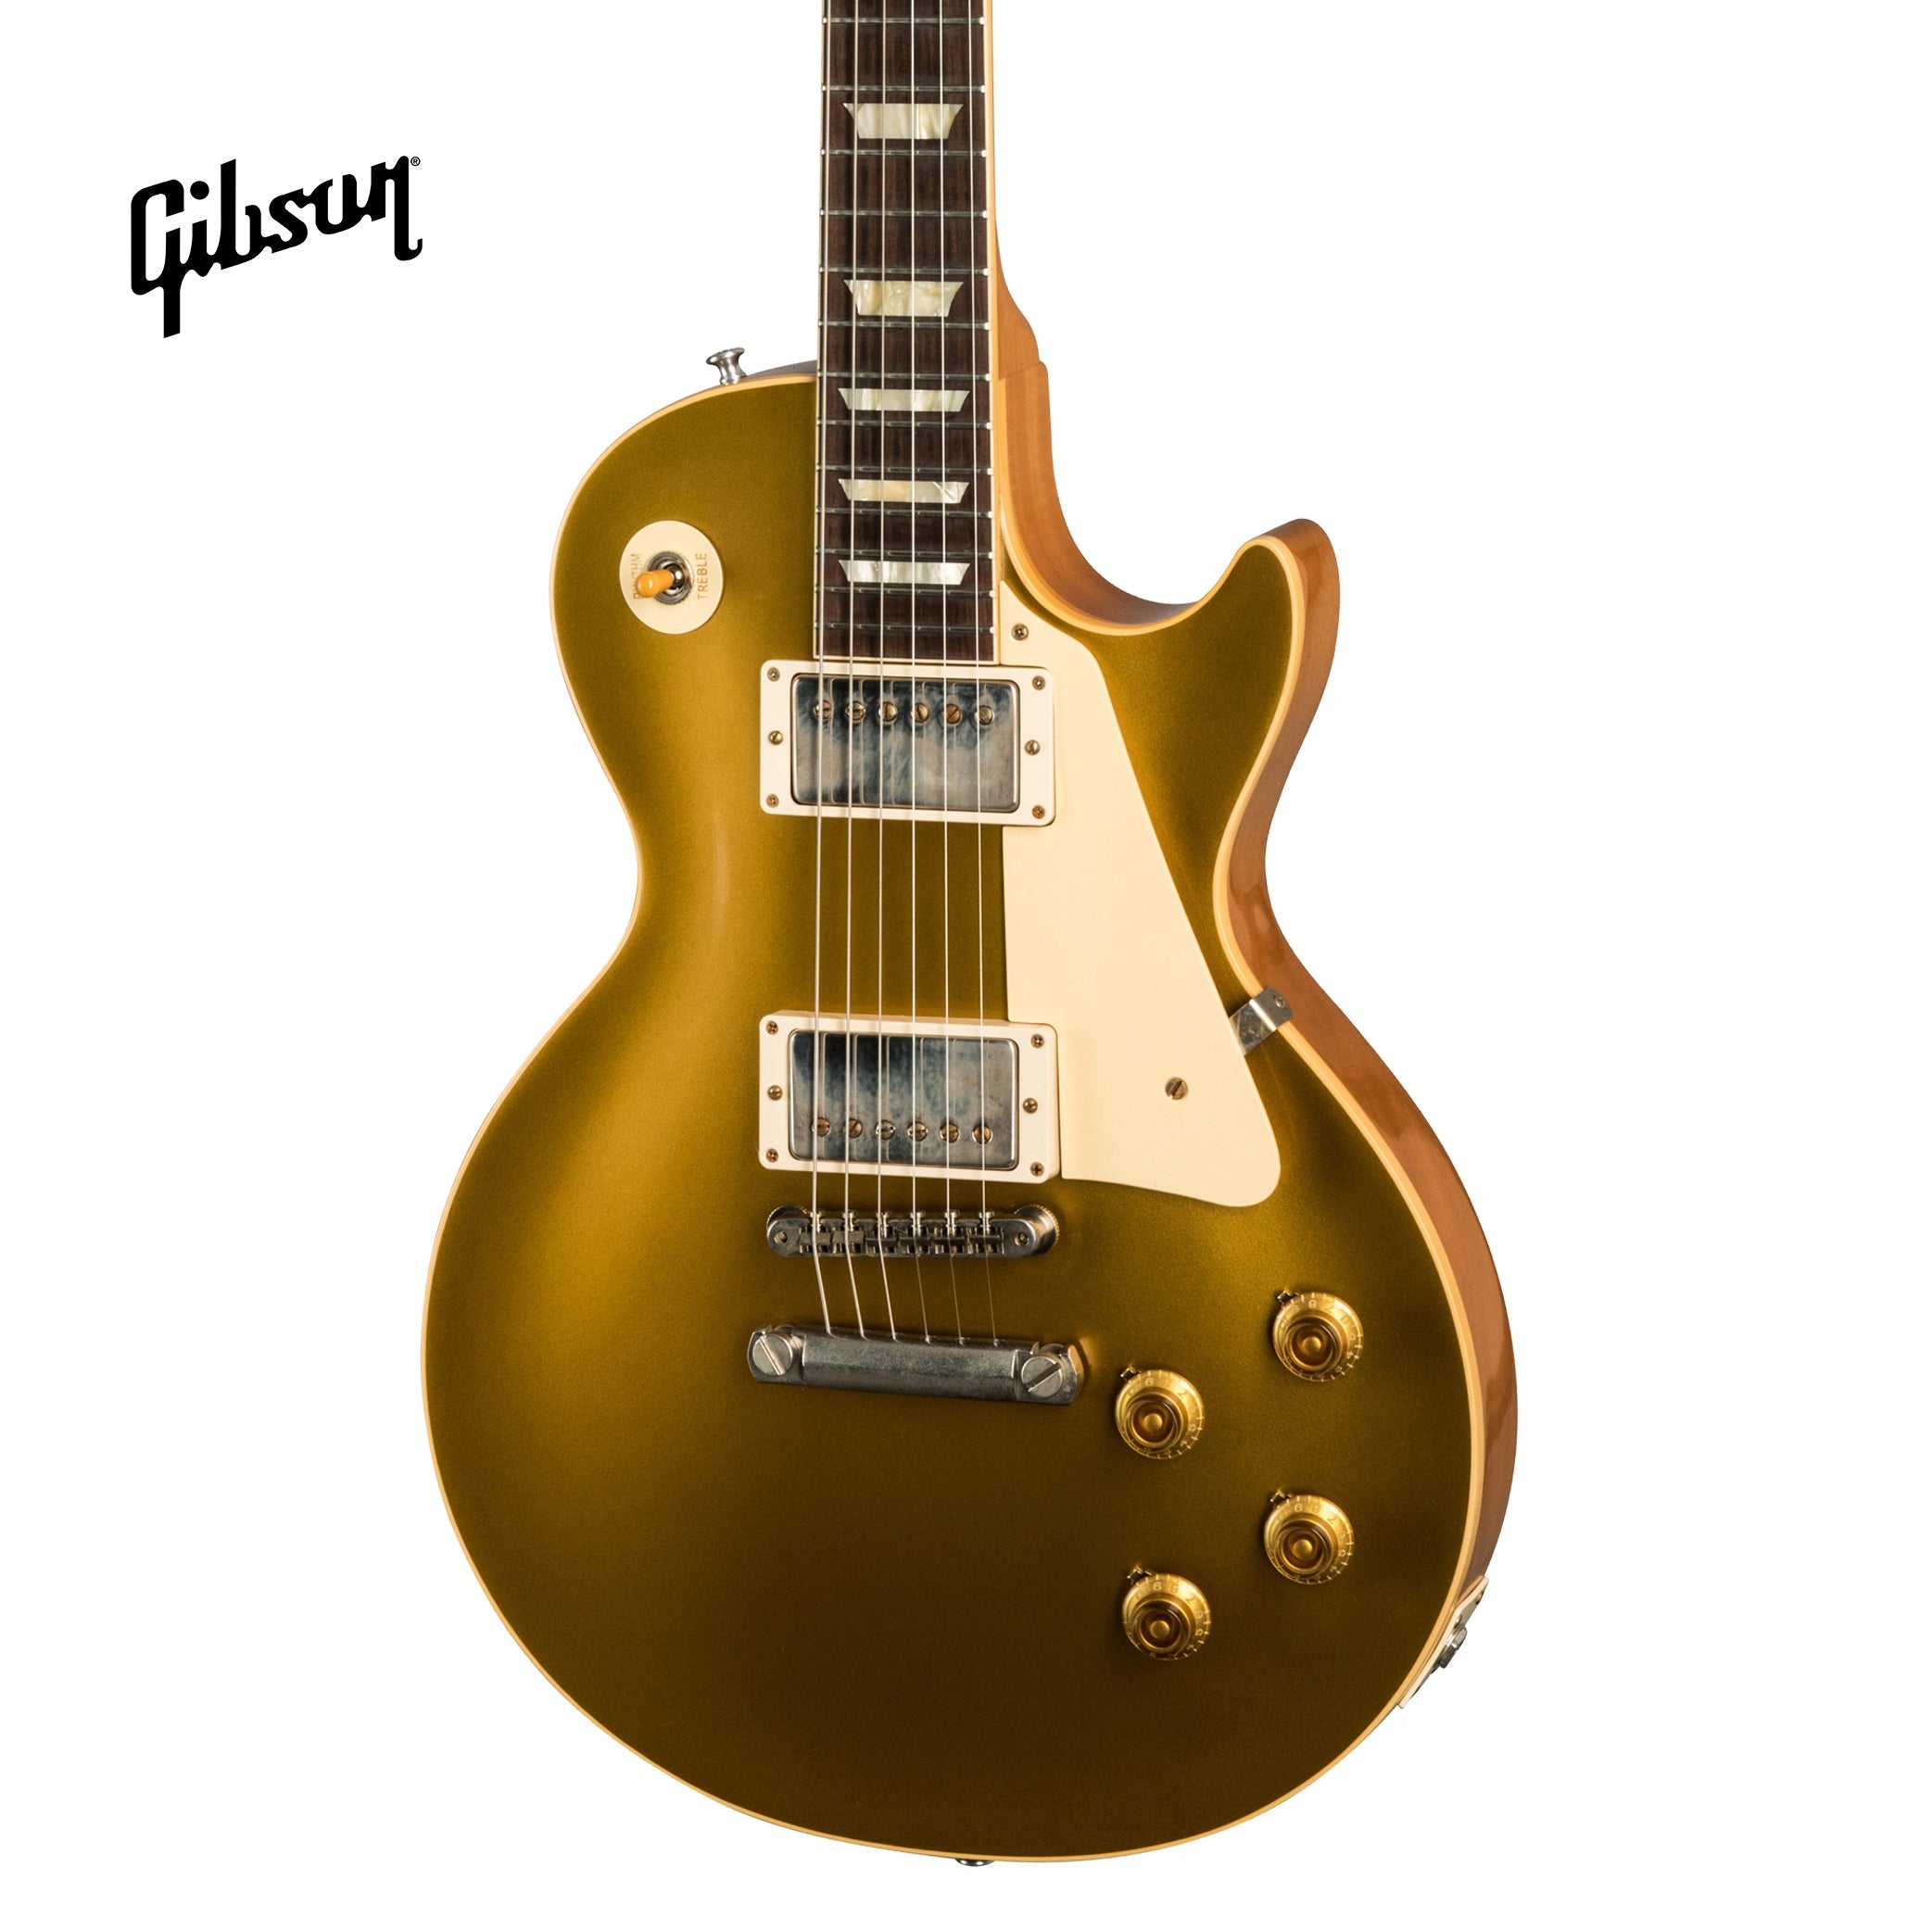 GIBSON 1957 LES PAUL GOLDTOP REISSUE VOS ELECTRIC GUITAR - DOUBLE GOLD